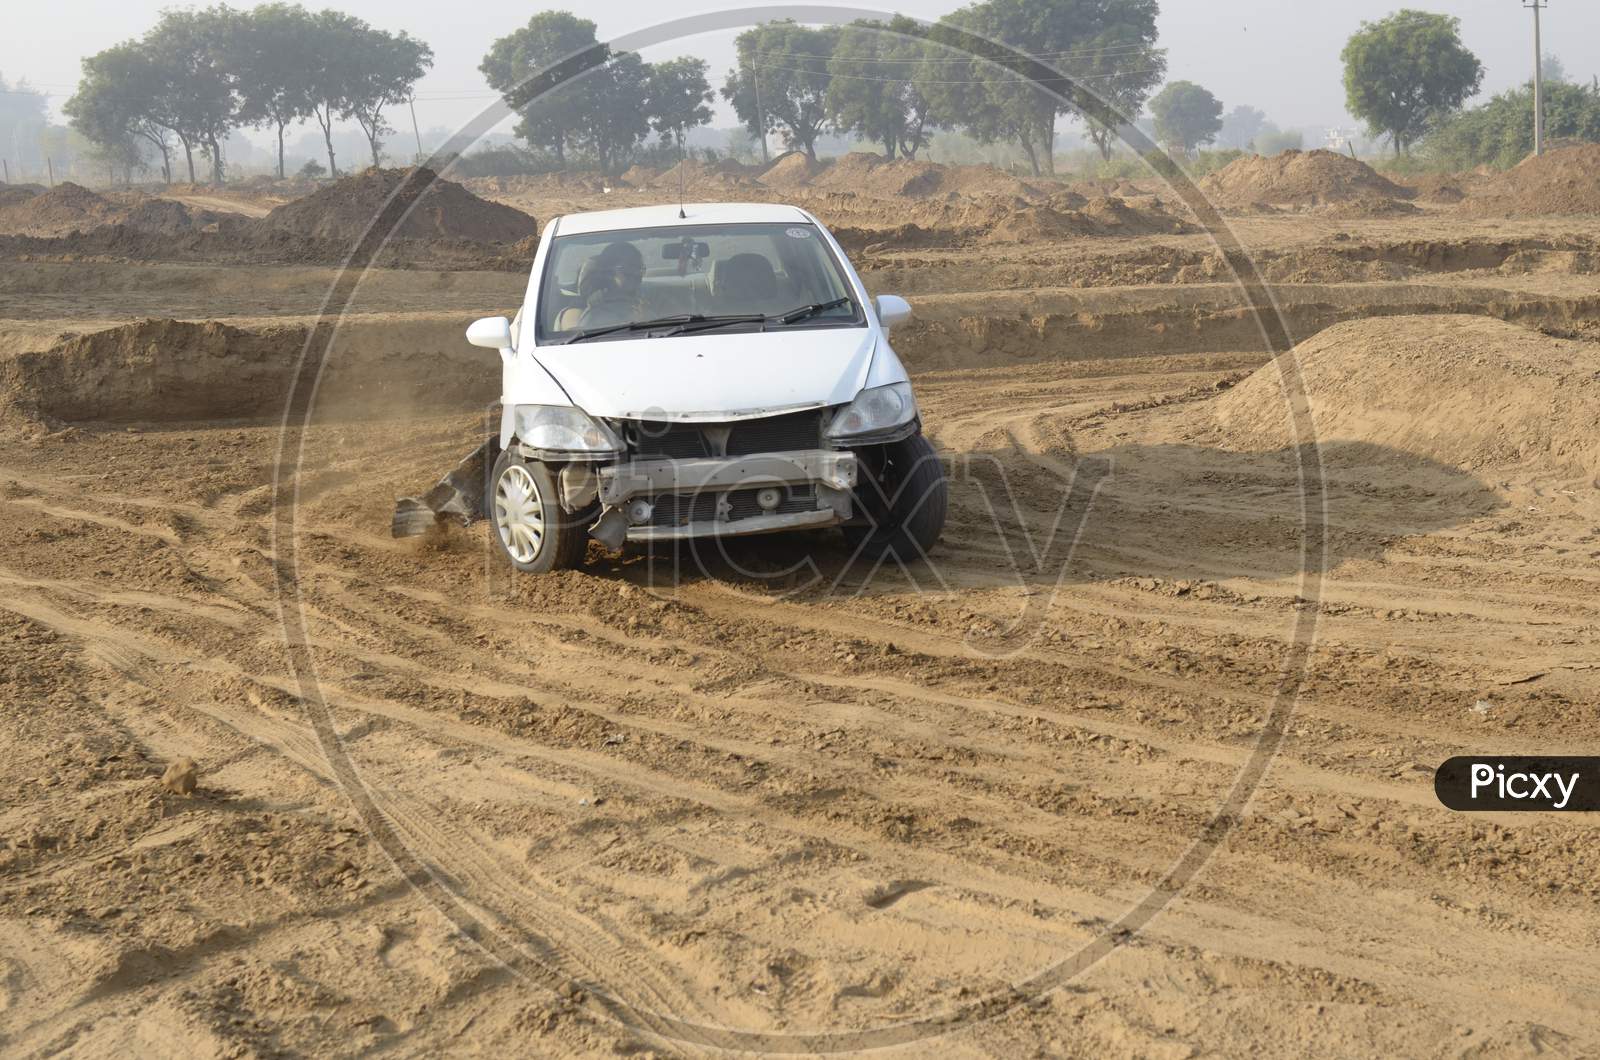 Car Or  Off-Road Vehicle  in an Rally Championship  With Drifting And Sand and Soil  Splashes on Rally Tracks